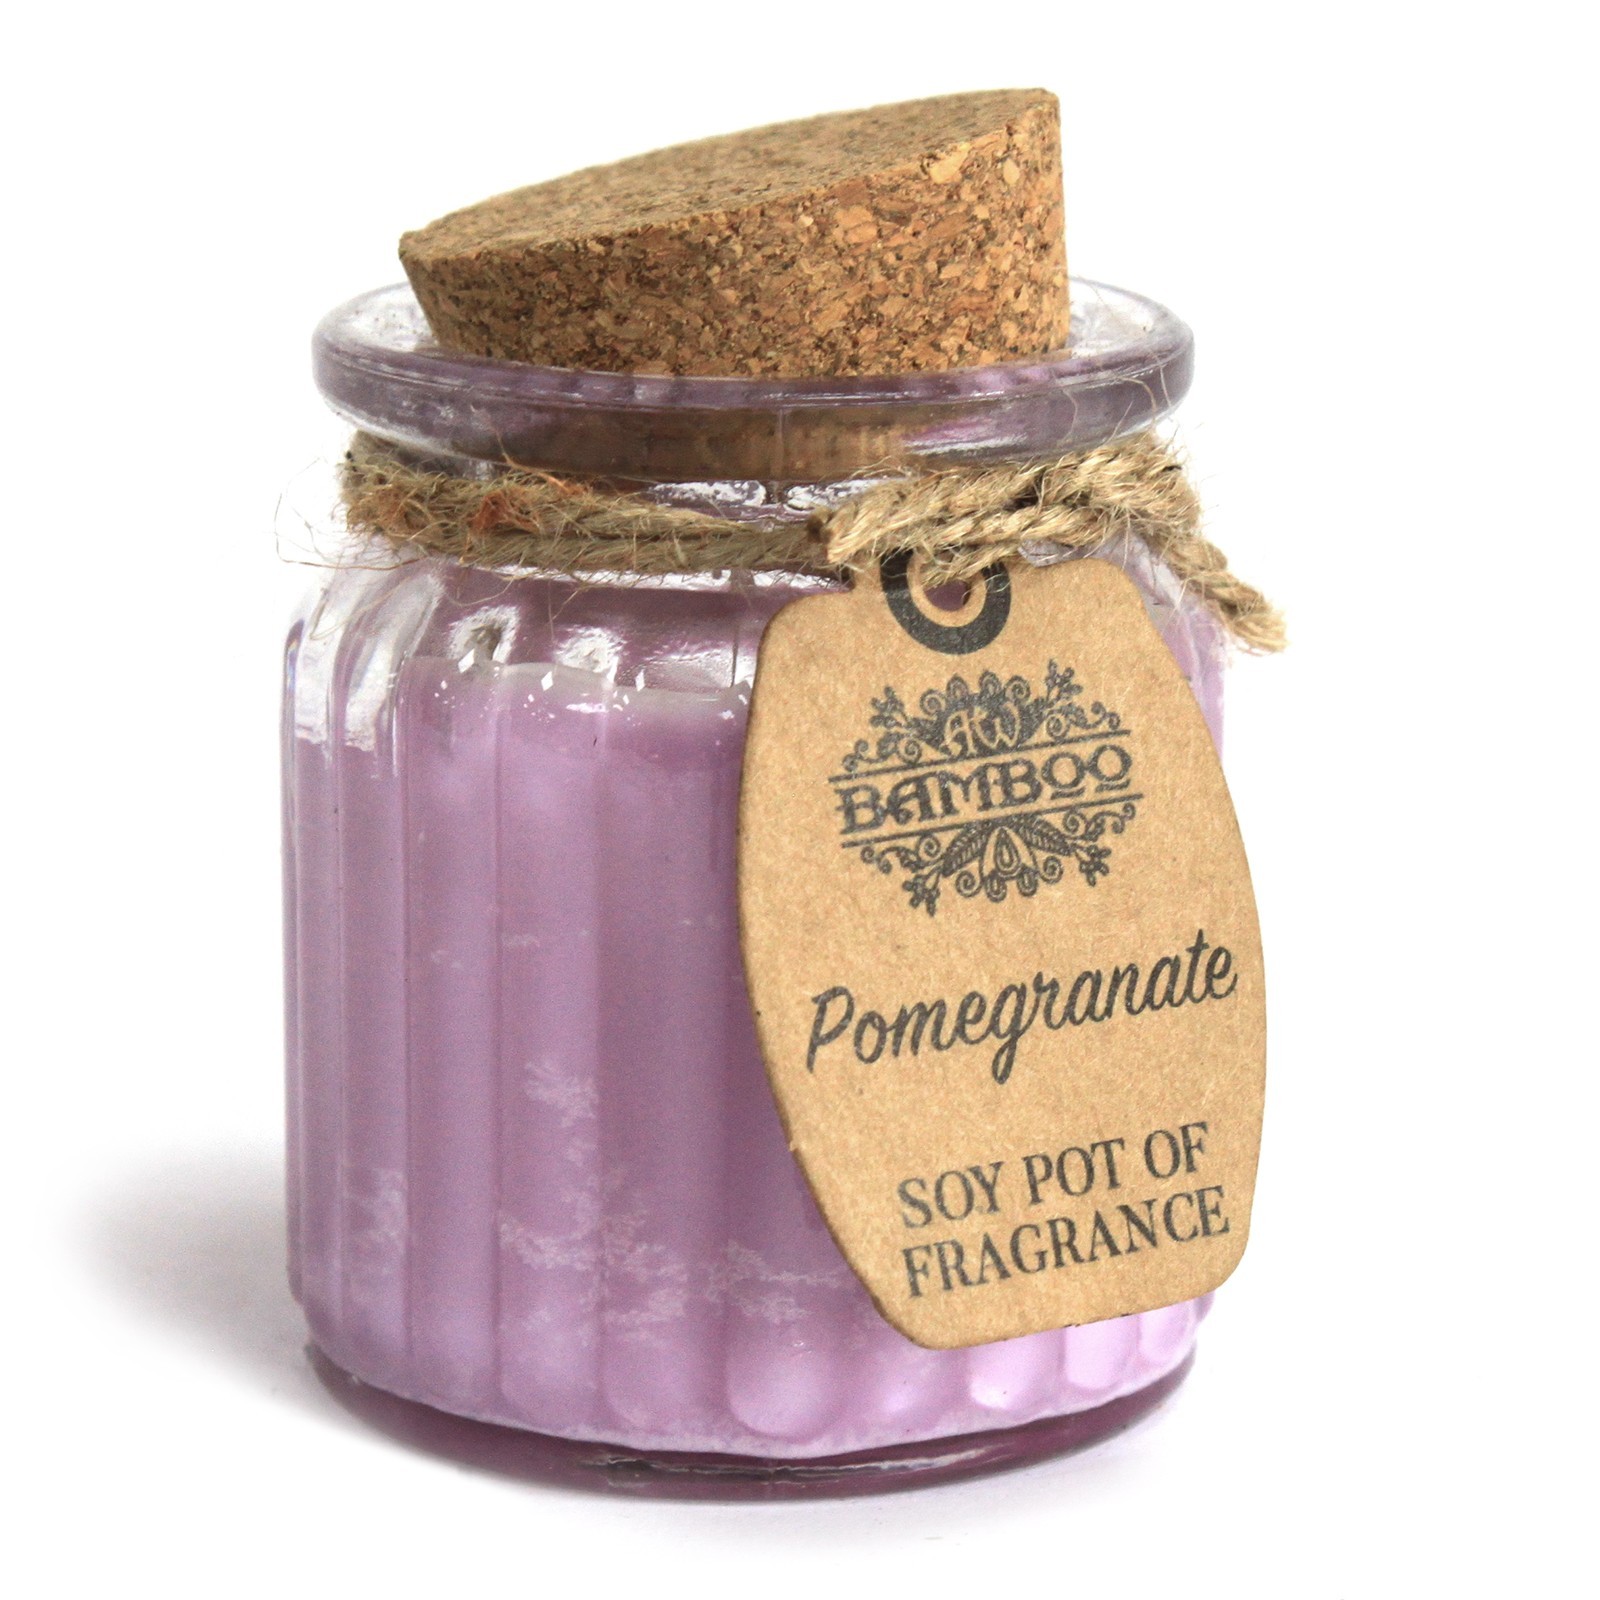 Pomegranate Soy Pot of Fragrance Candle - SoyP-09